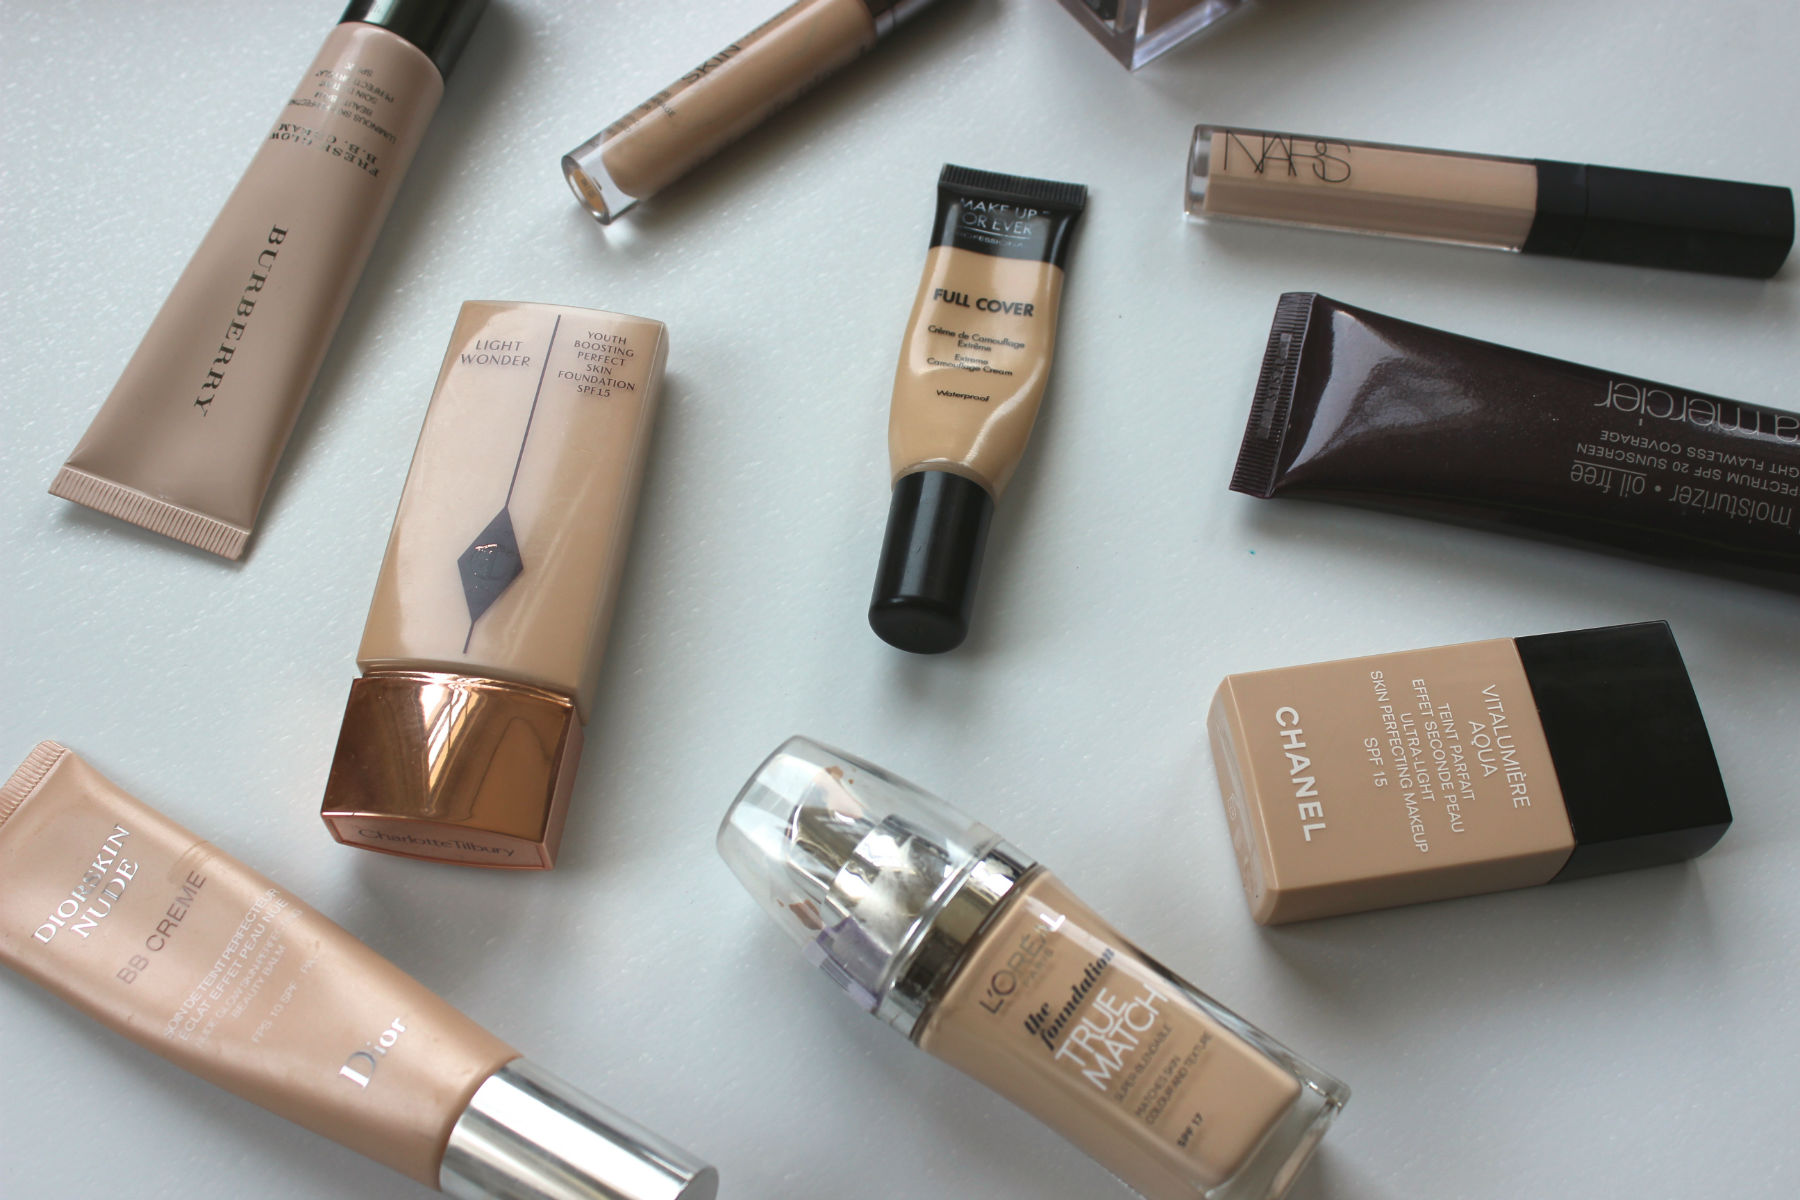 All my Chanel Foundations (Fair to Light shades)